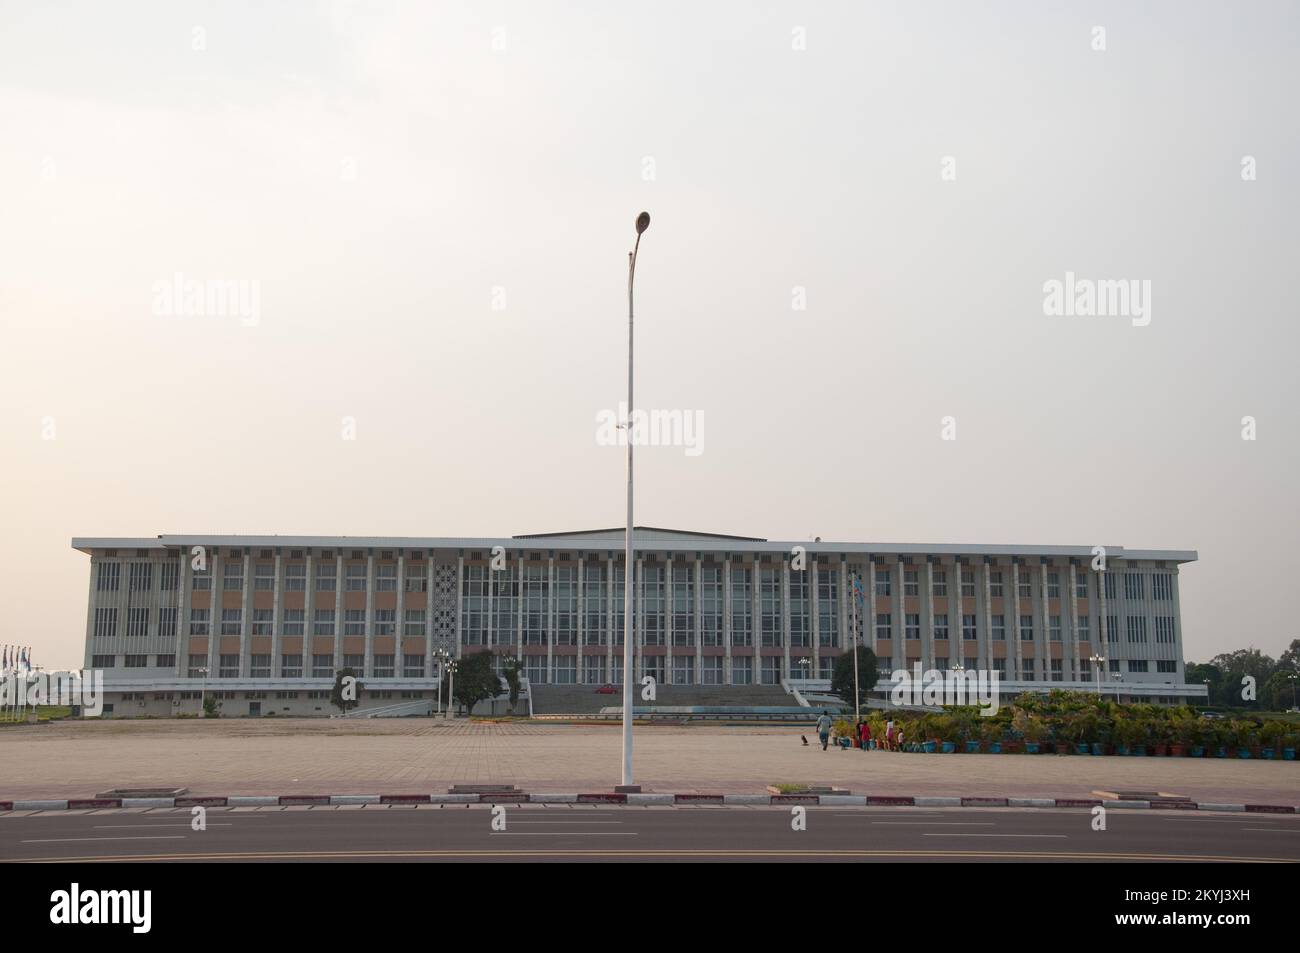 People's Palace (Palais du Peuple), This building was built by the Chinese and now contains the Congolese Parliament, and many governemnt offices. Stock Photo